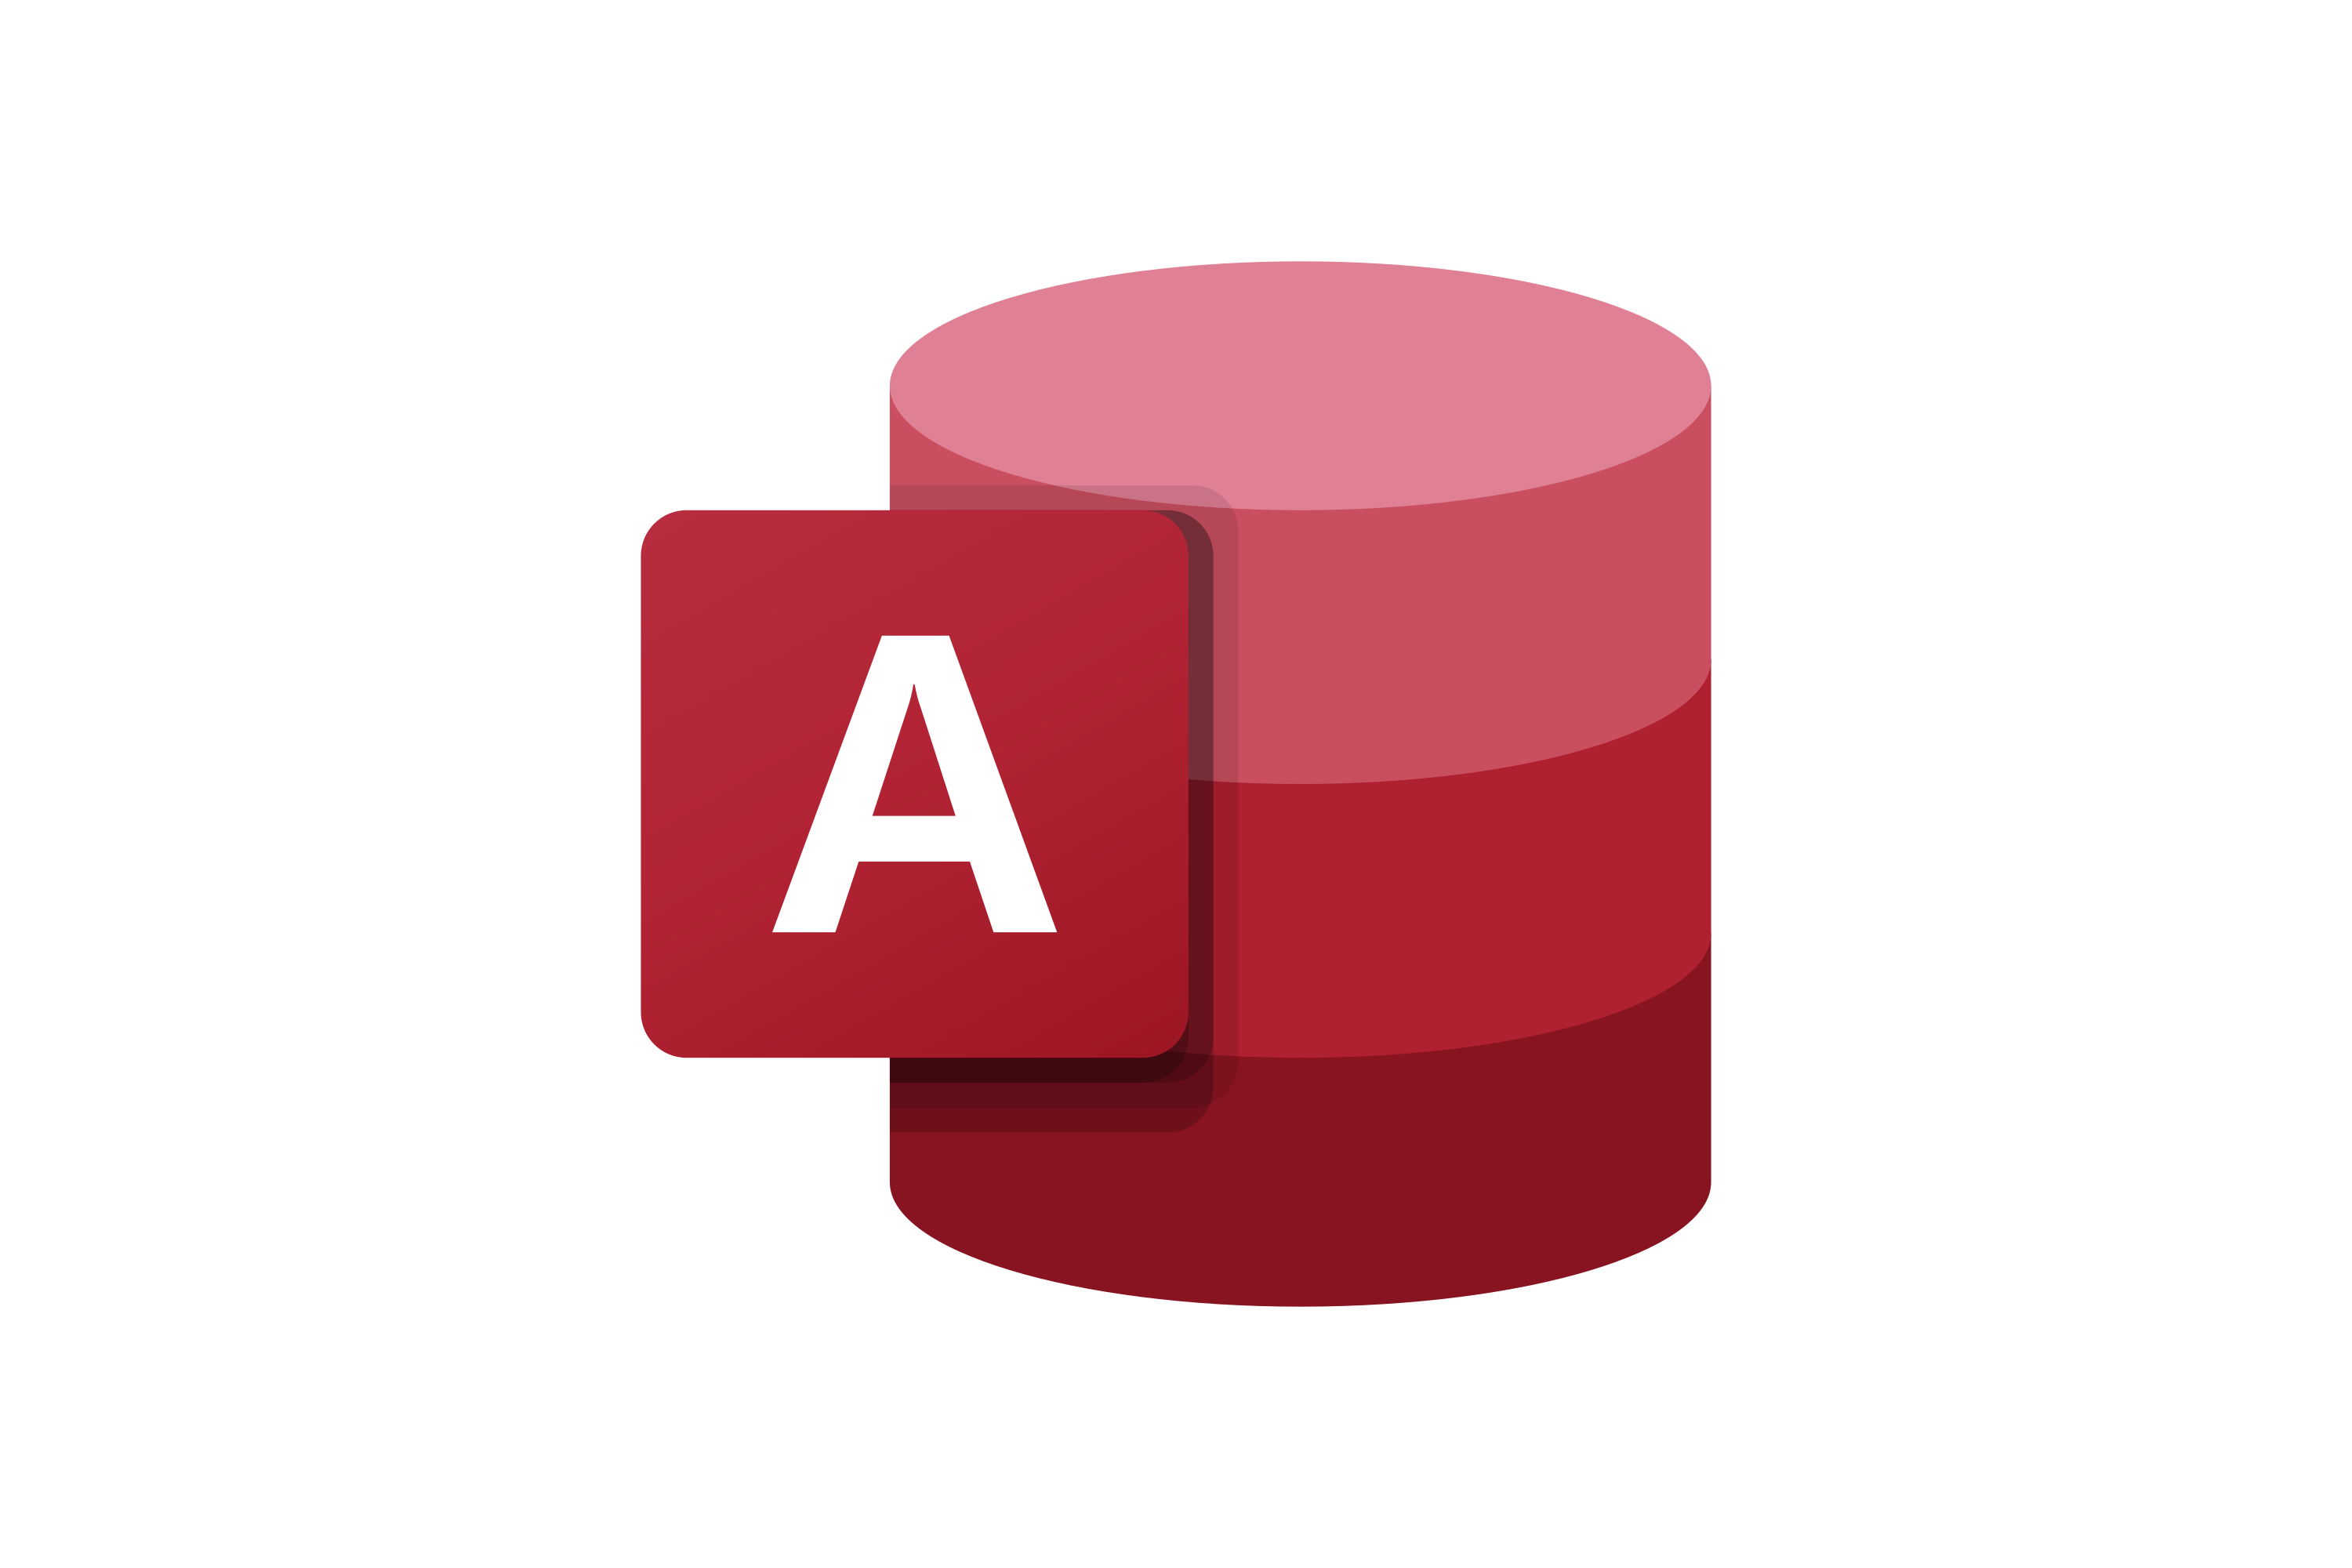 MSFT_ACC_2019L2: Microsoft Access 2019/2016 Part 2: Data Integrity and  Advanced Forms, Queries, and Reports, 1, $ (March 16, 2022) -  OfficePro Inc.